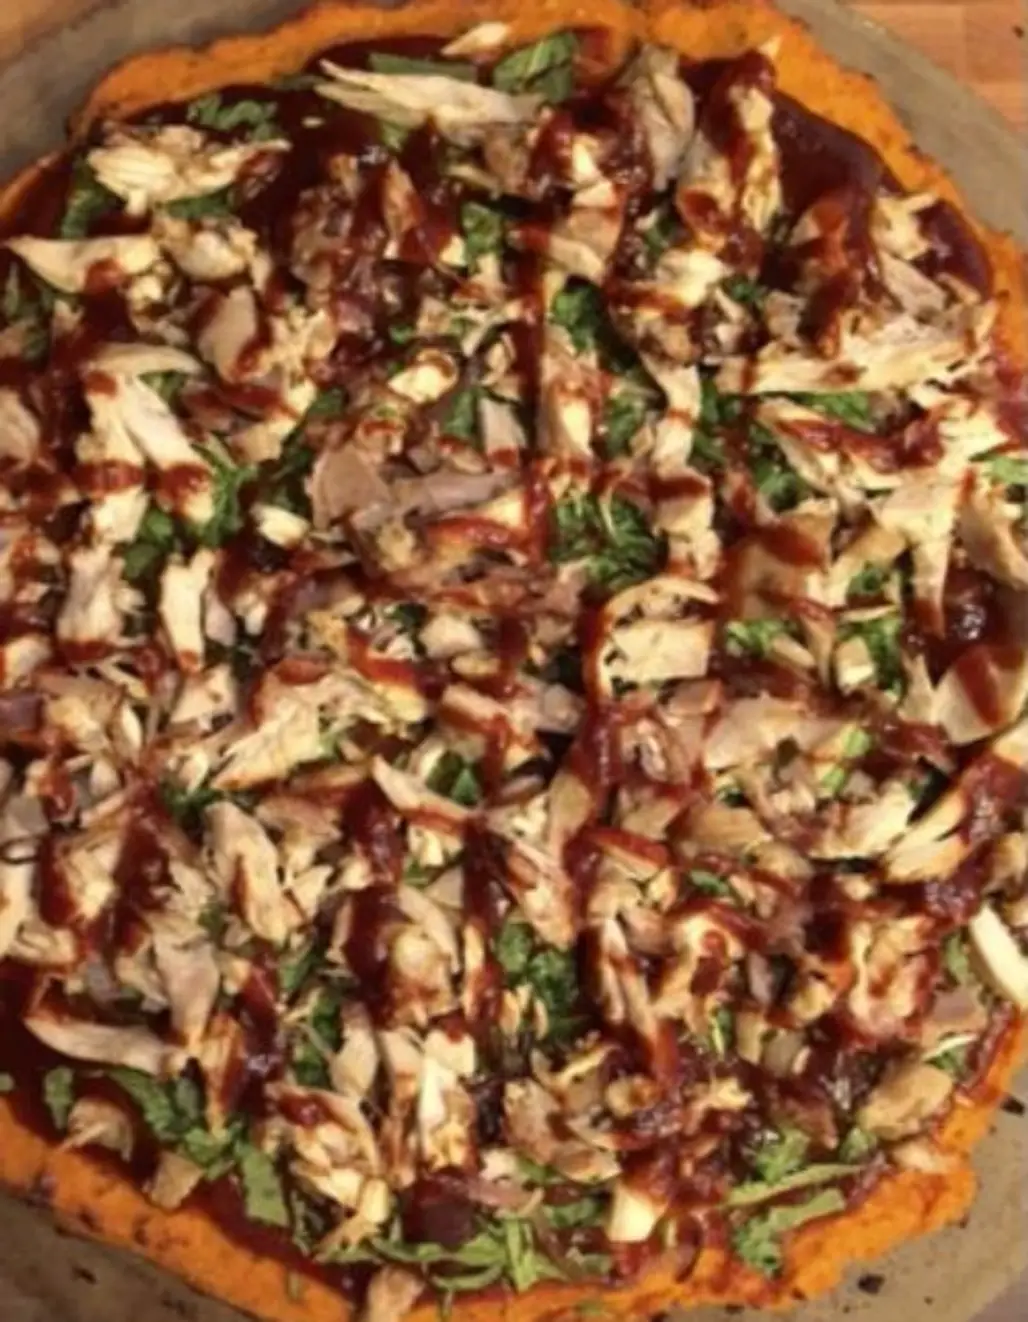 Barbecue Chicken Pizza with Sweet Potato Crust